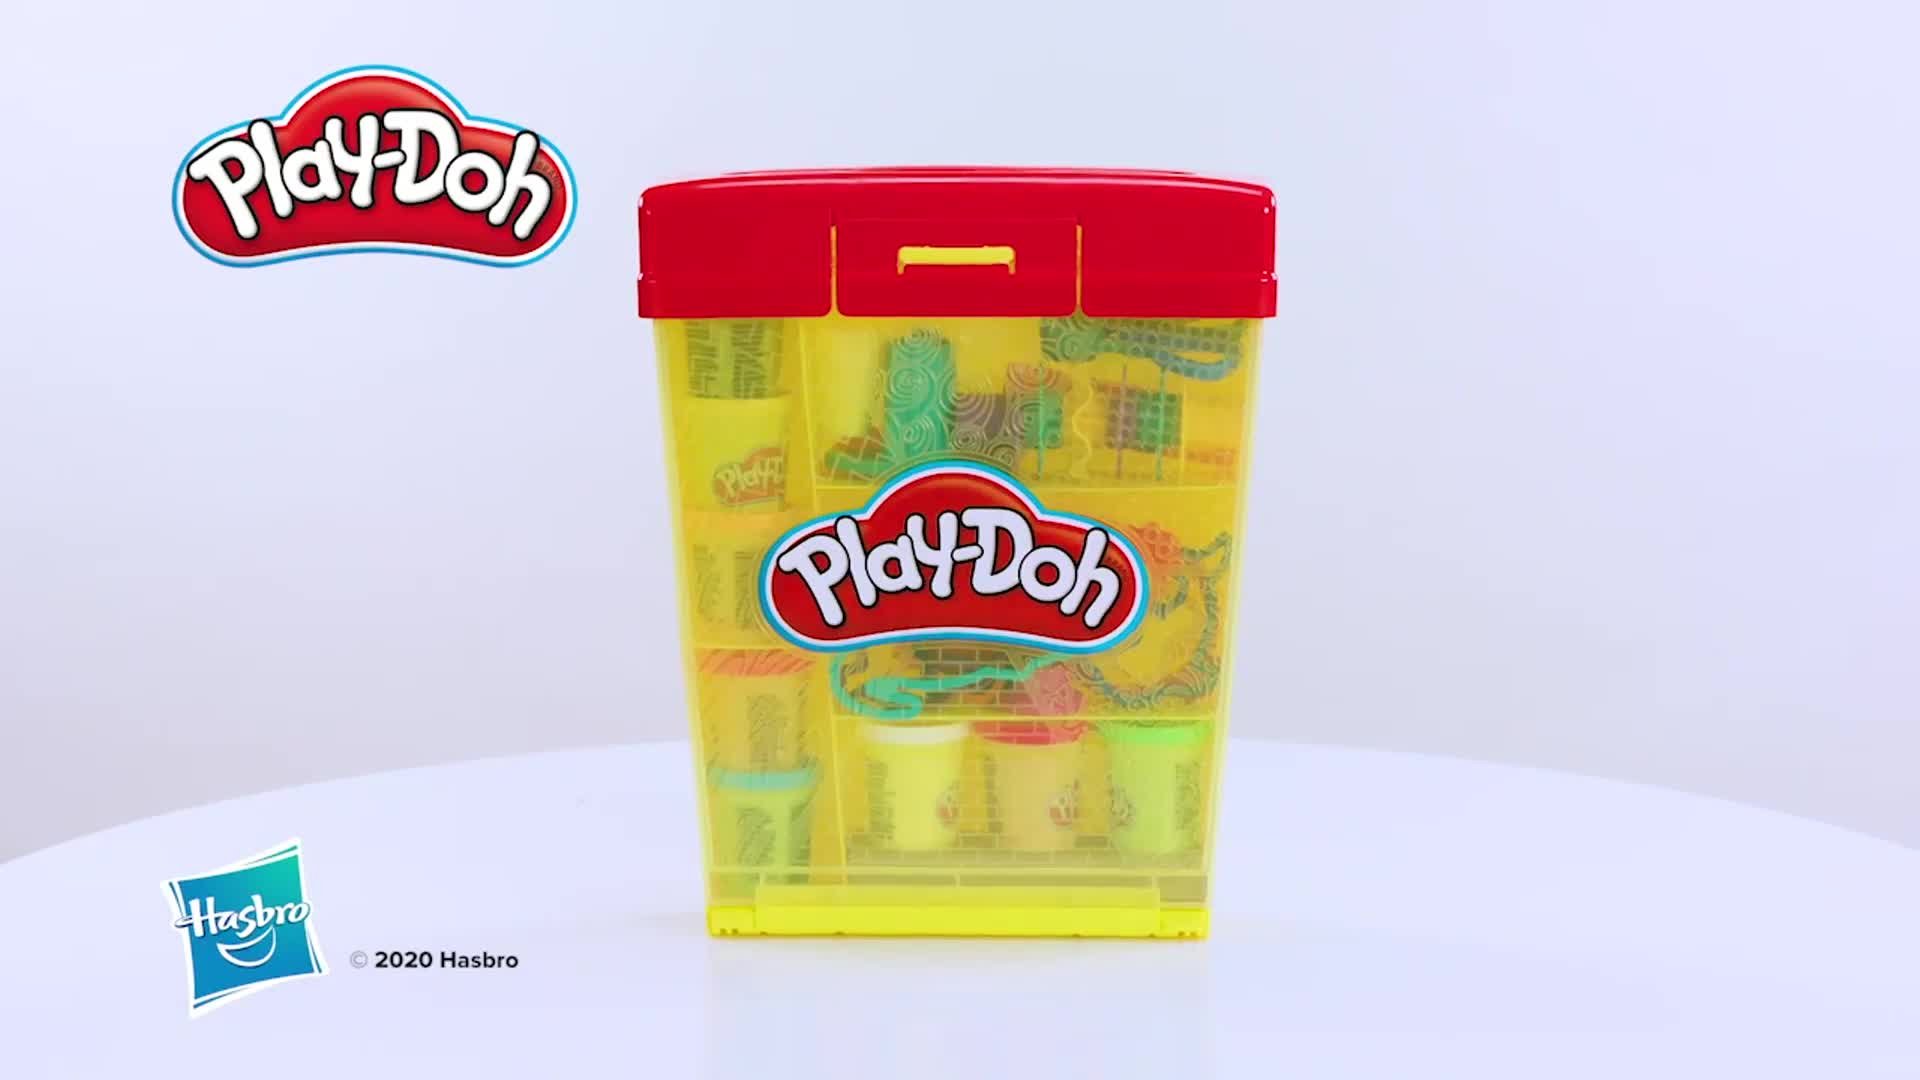 Buy Play-Doh Tools And Storage, Dough and modelling toys